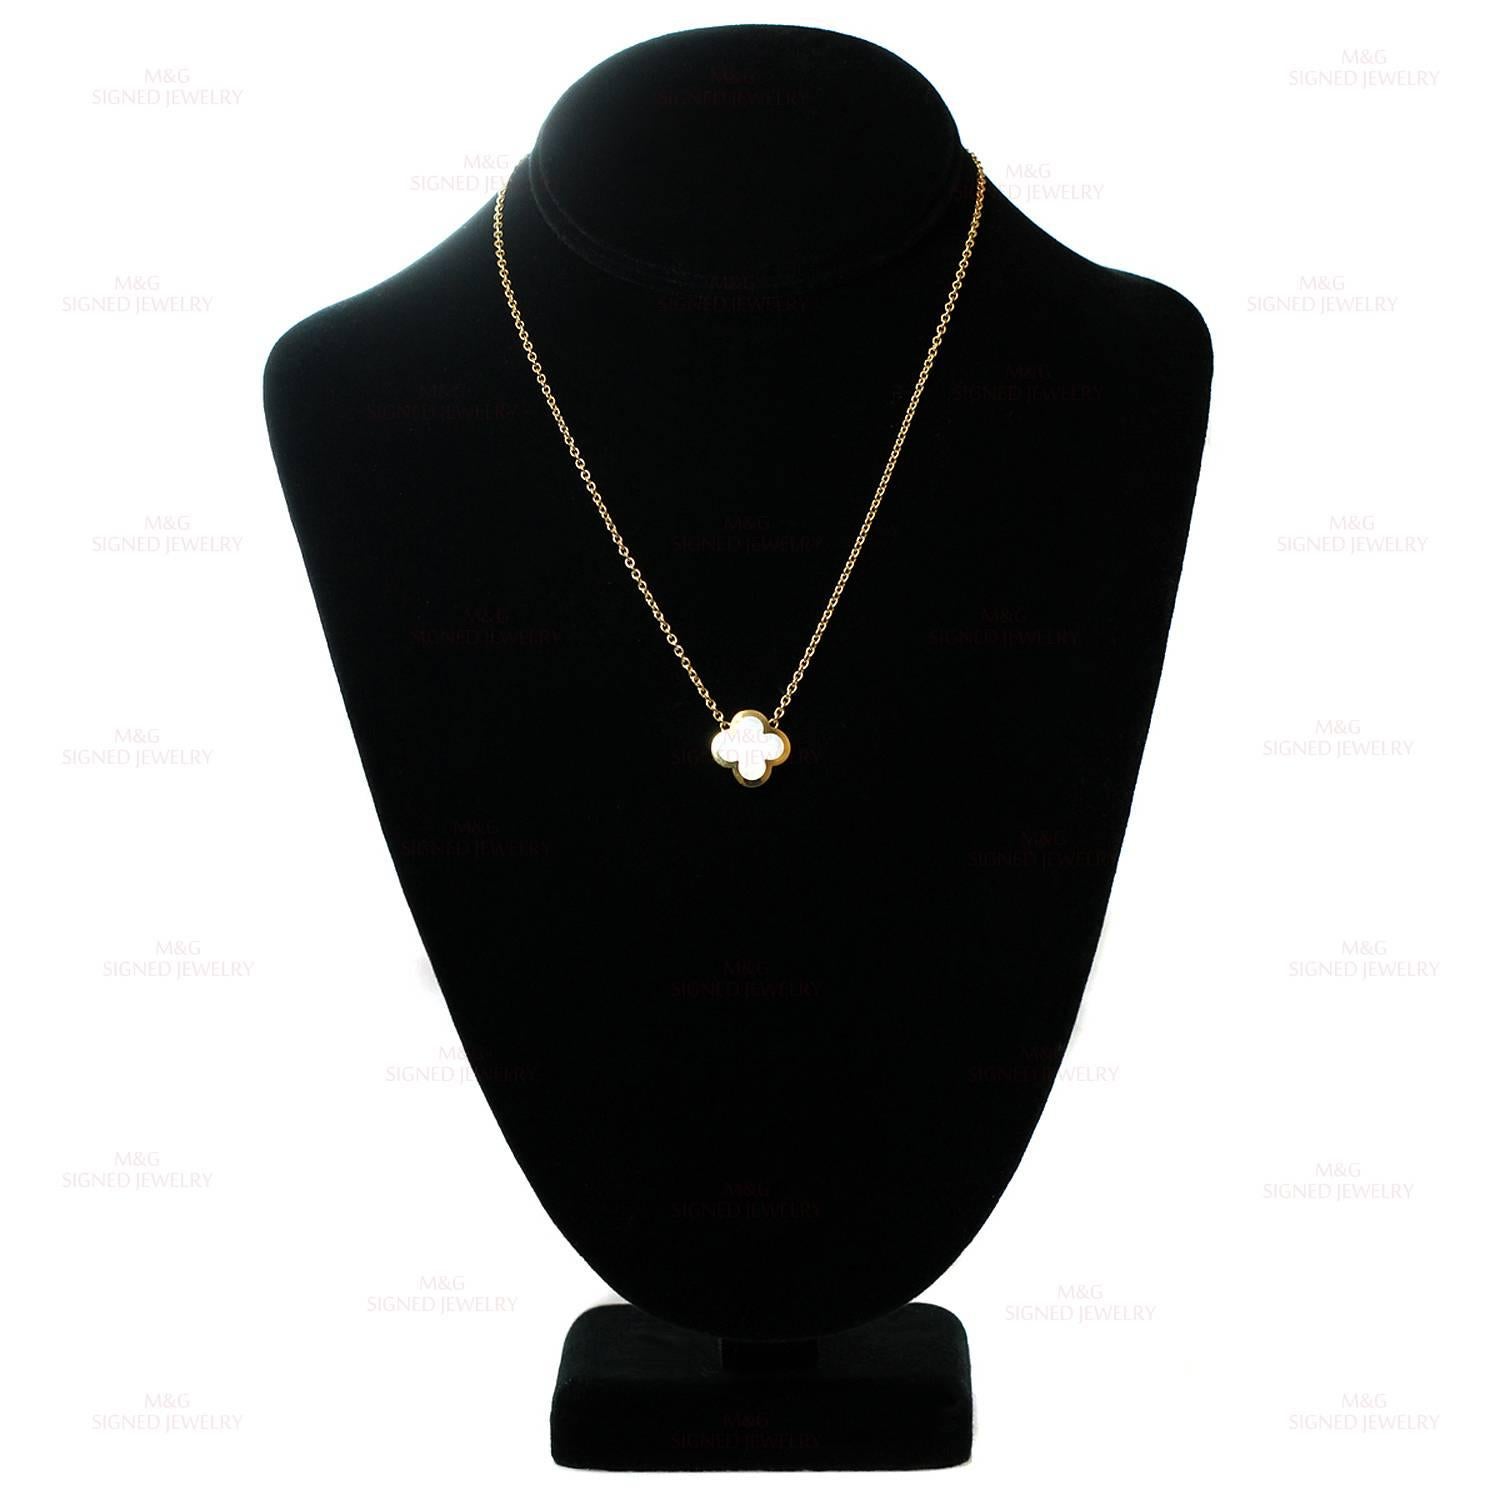 Women's Van Cleef & Arpels Pure Alhambra Mother-of-Pearl Yellow Gold Pendant Necklace